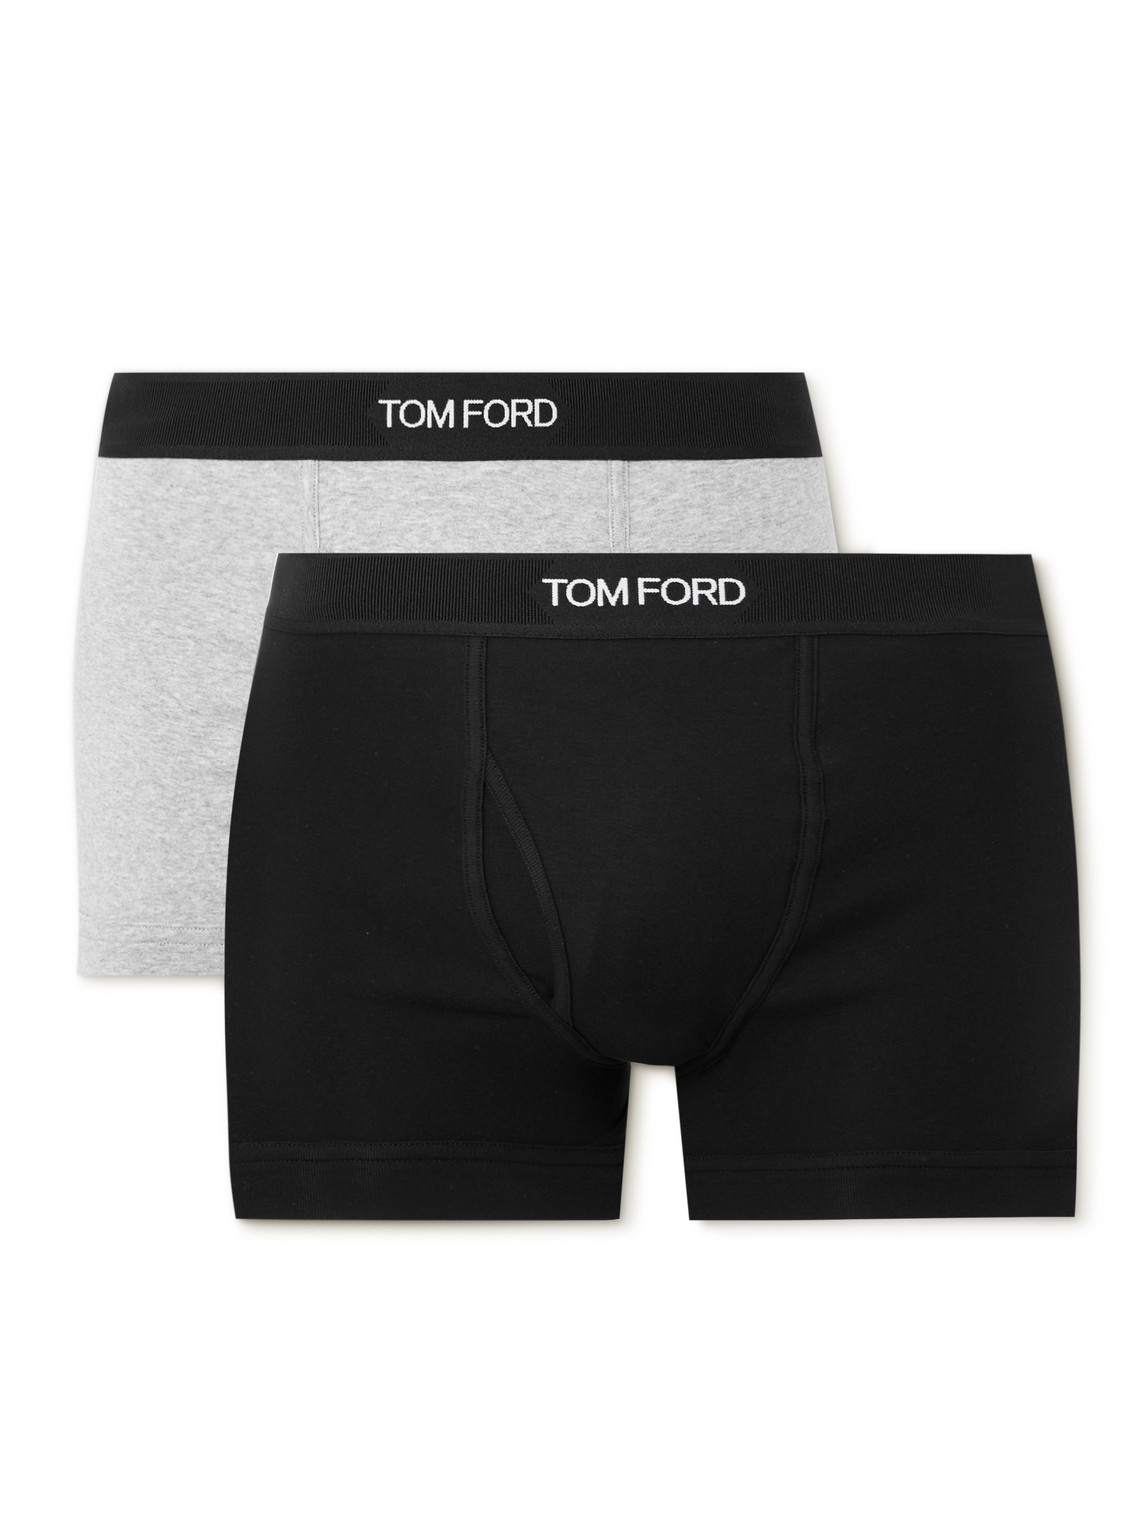 TOM FORD - Two-Pack Stretch-Cotton Jersey Boxer Briefs - Men - Multi - M von TOM FORD